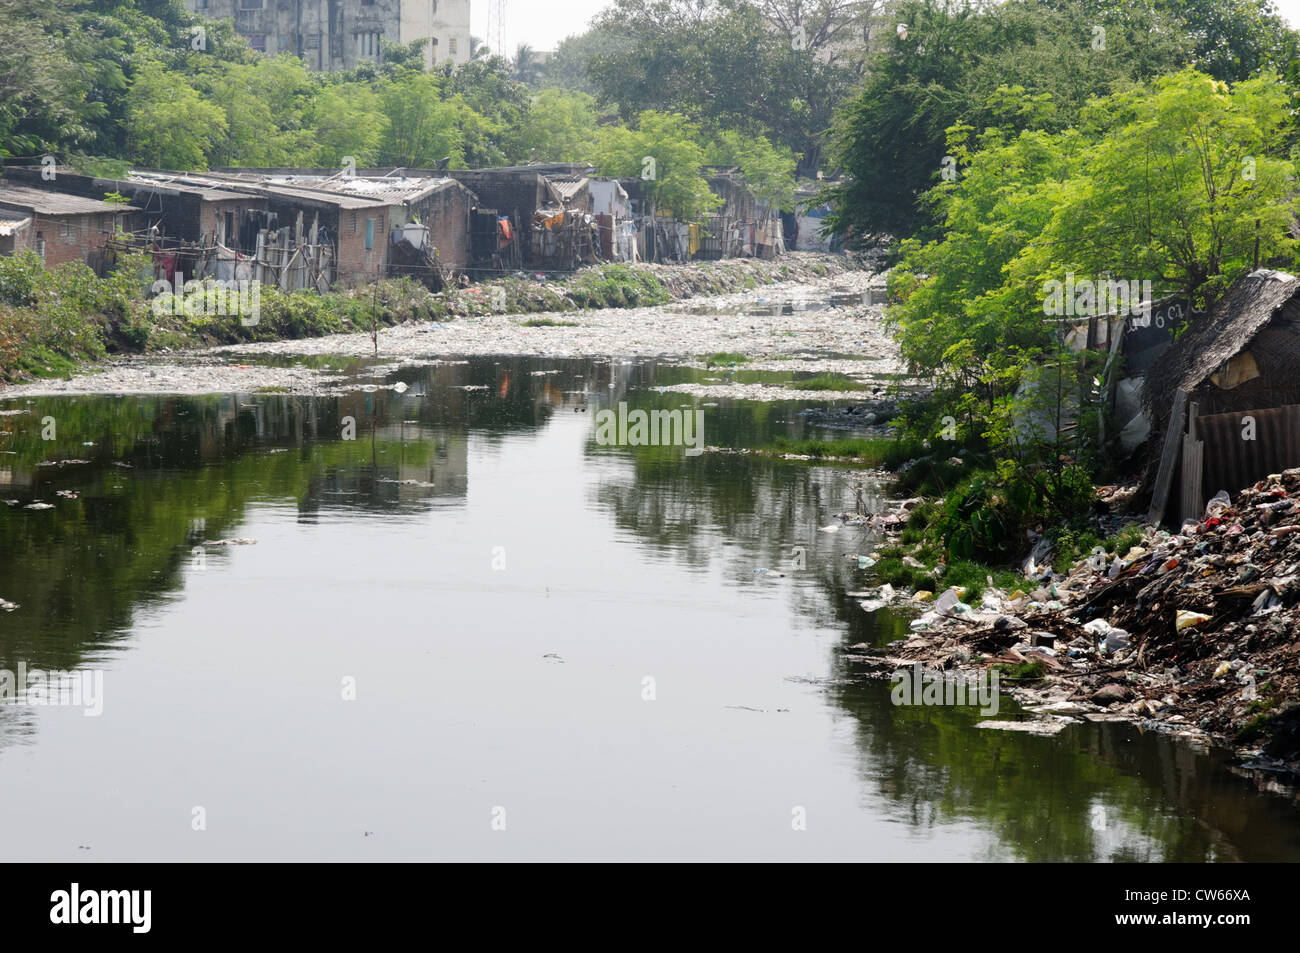 A filthy polluted river in India Stock Photo